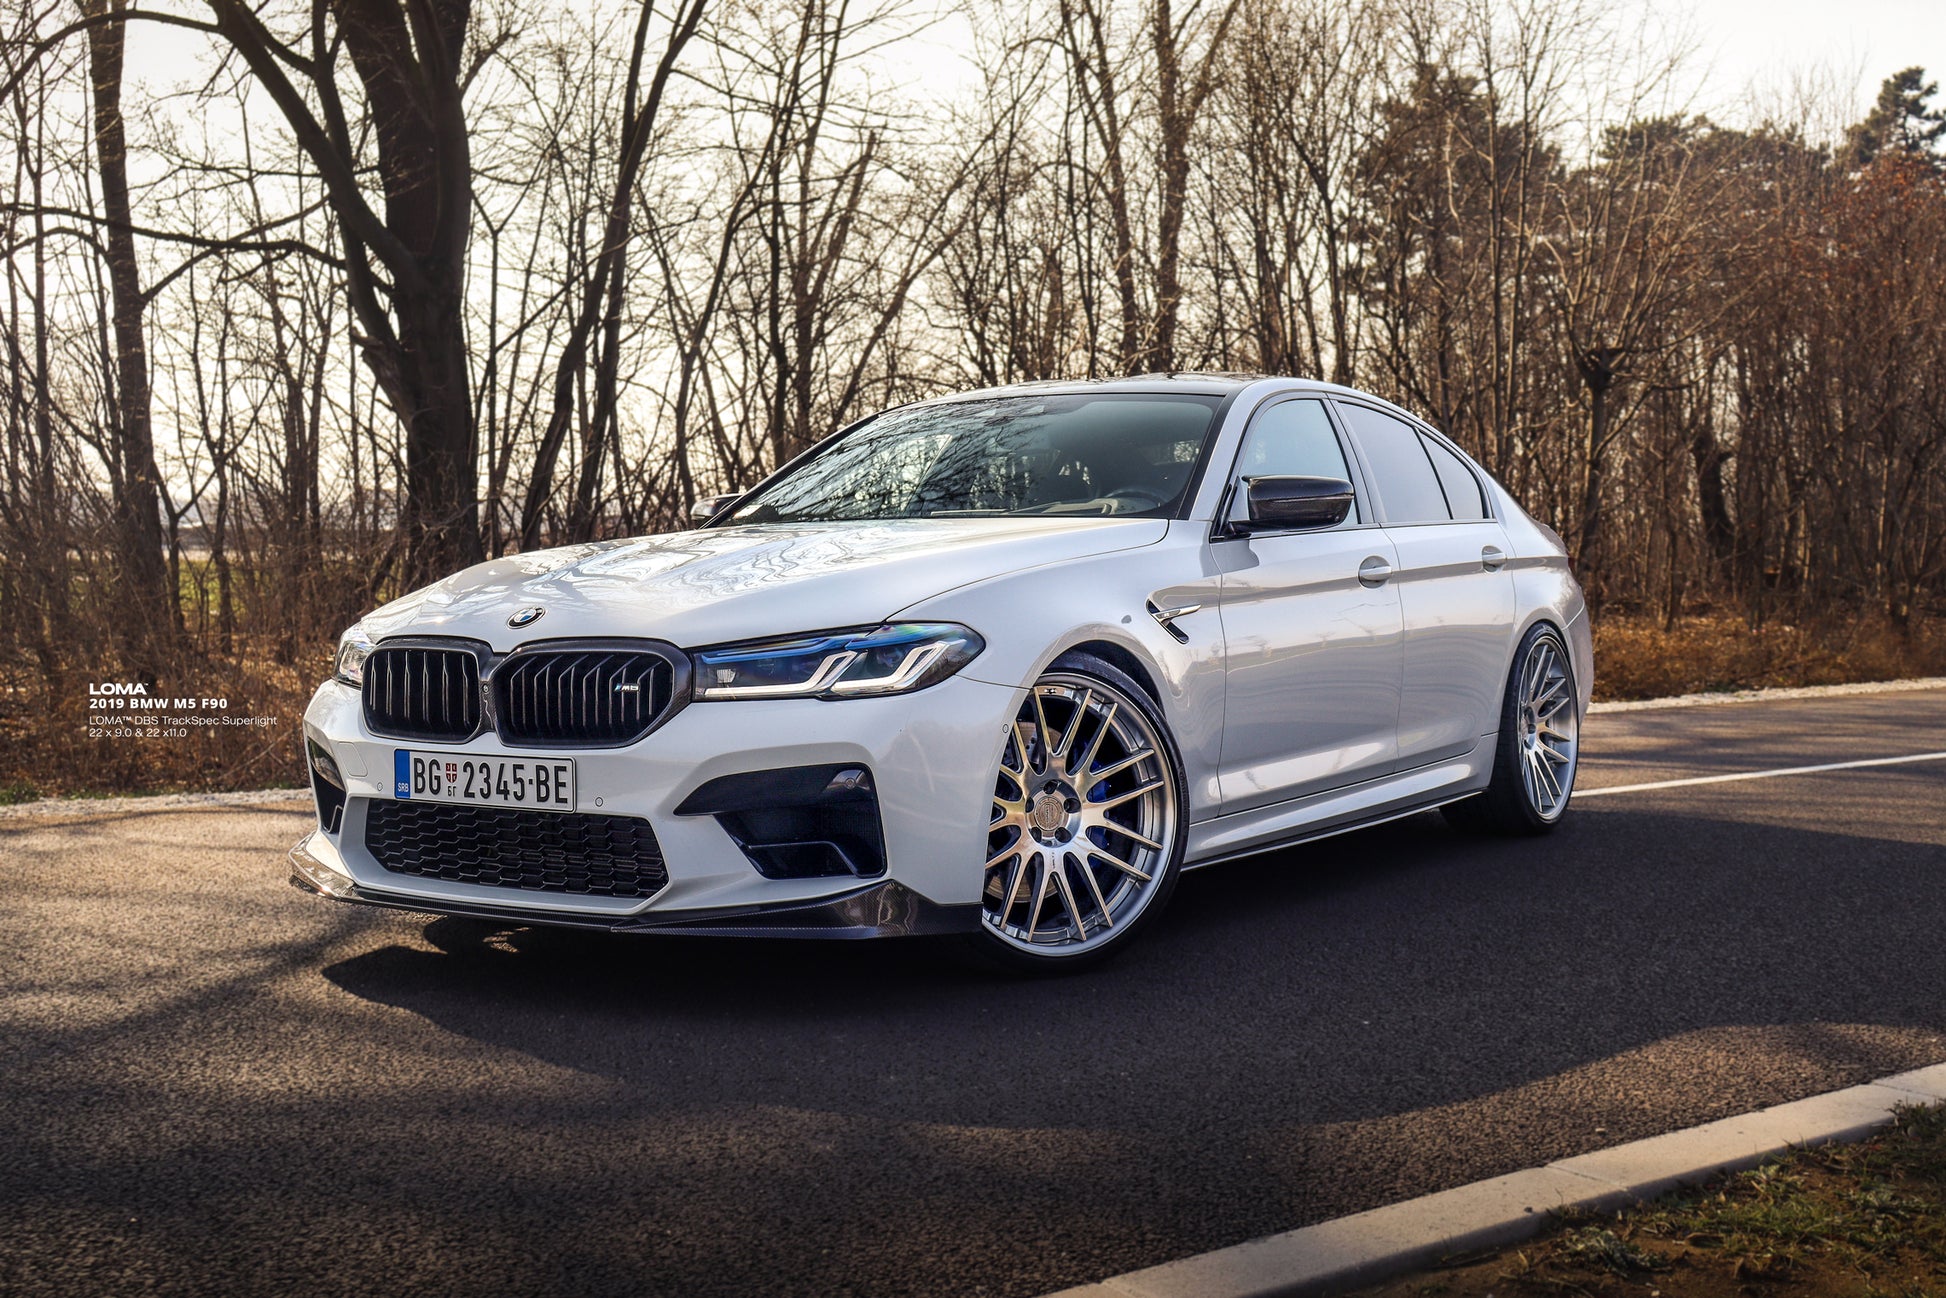 BMW M5 F90 equipped with performance-enhancing GTC Competition rims